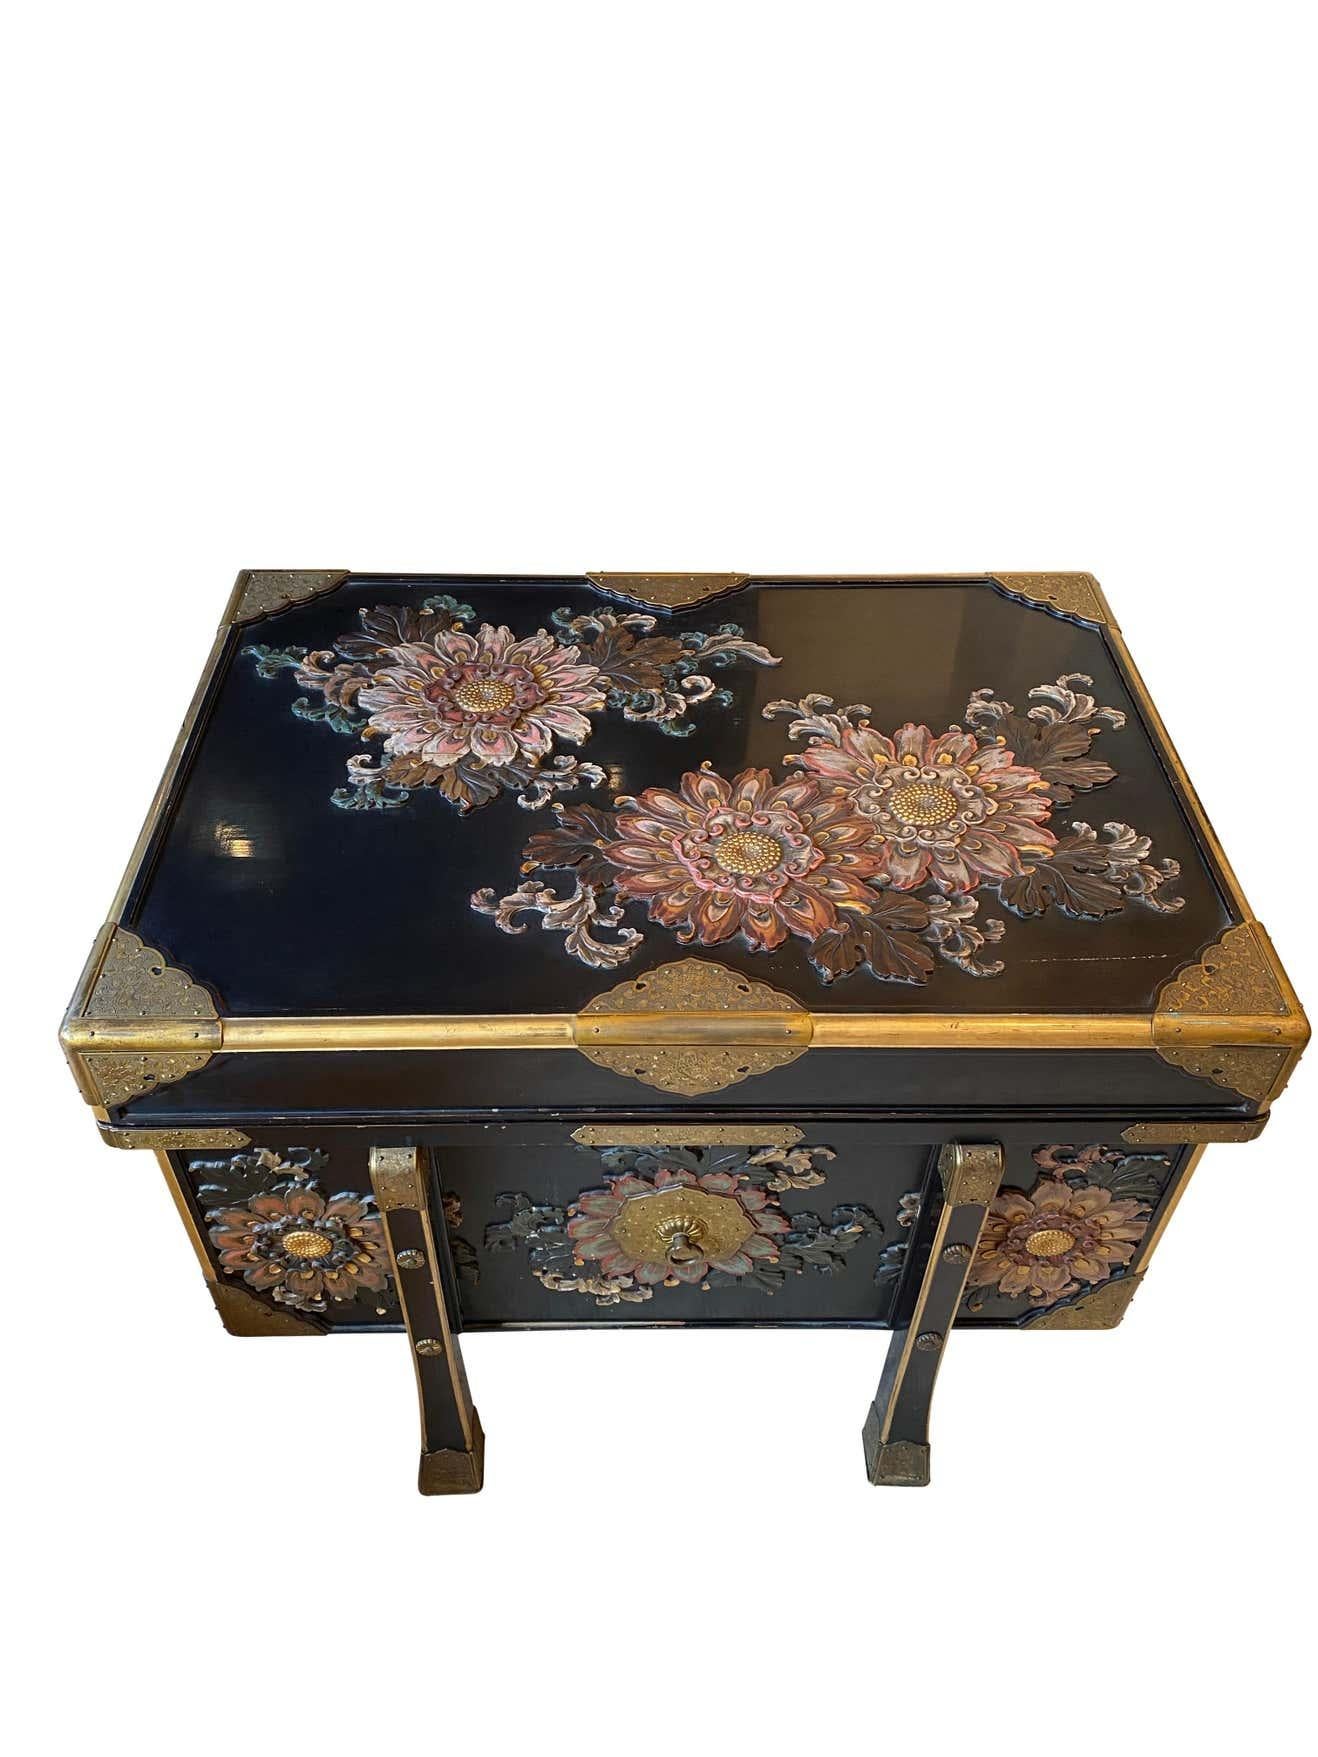 Large Japanese Black Lacquered Storage Chest, 19th Century For Sale 14